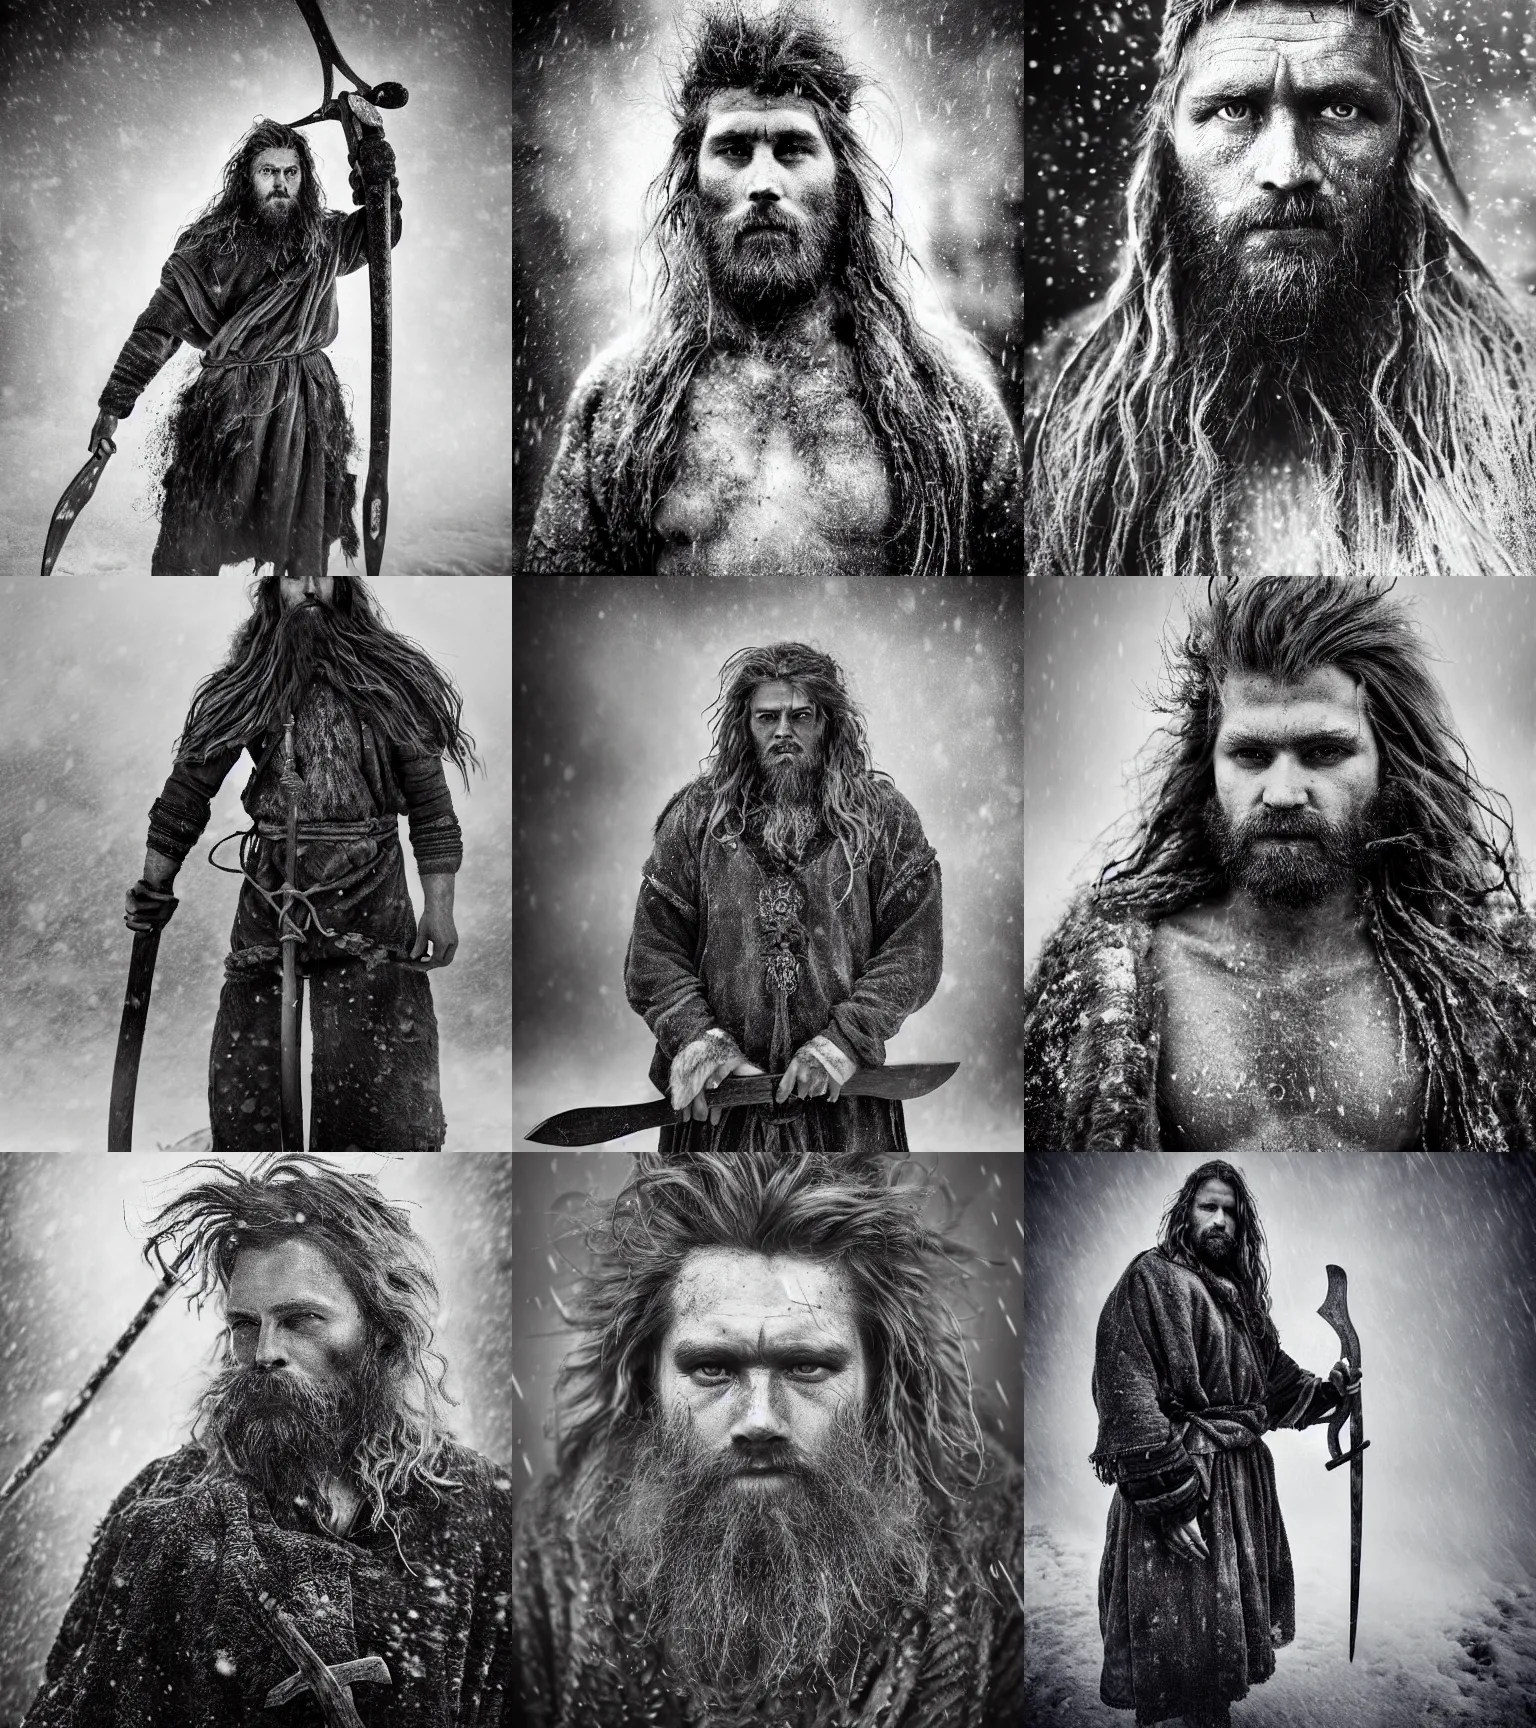 Prompt: Award winning full-body photograph of Early-medieval Scandinavian Folk hero with incredible hair and beautiful hyper-detailed eyes holding a battle-axe, wearing traditional garb in a snowstorm by Lee Jeffries, 85mm ND 4, perfect lighting, gelatin silver process